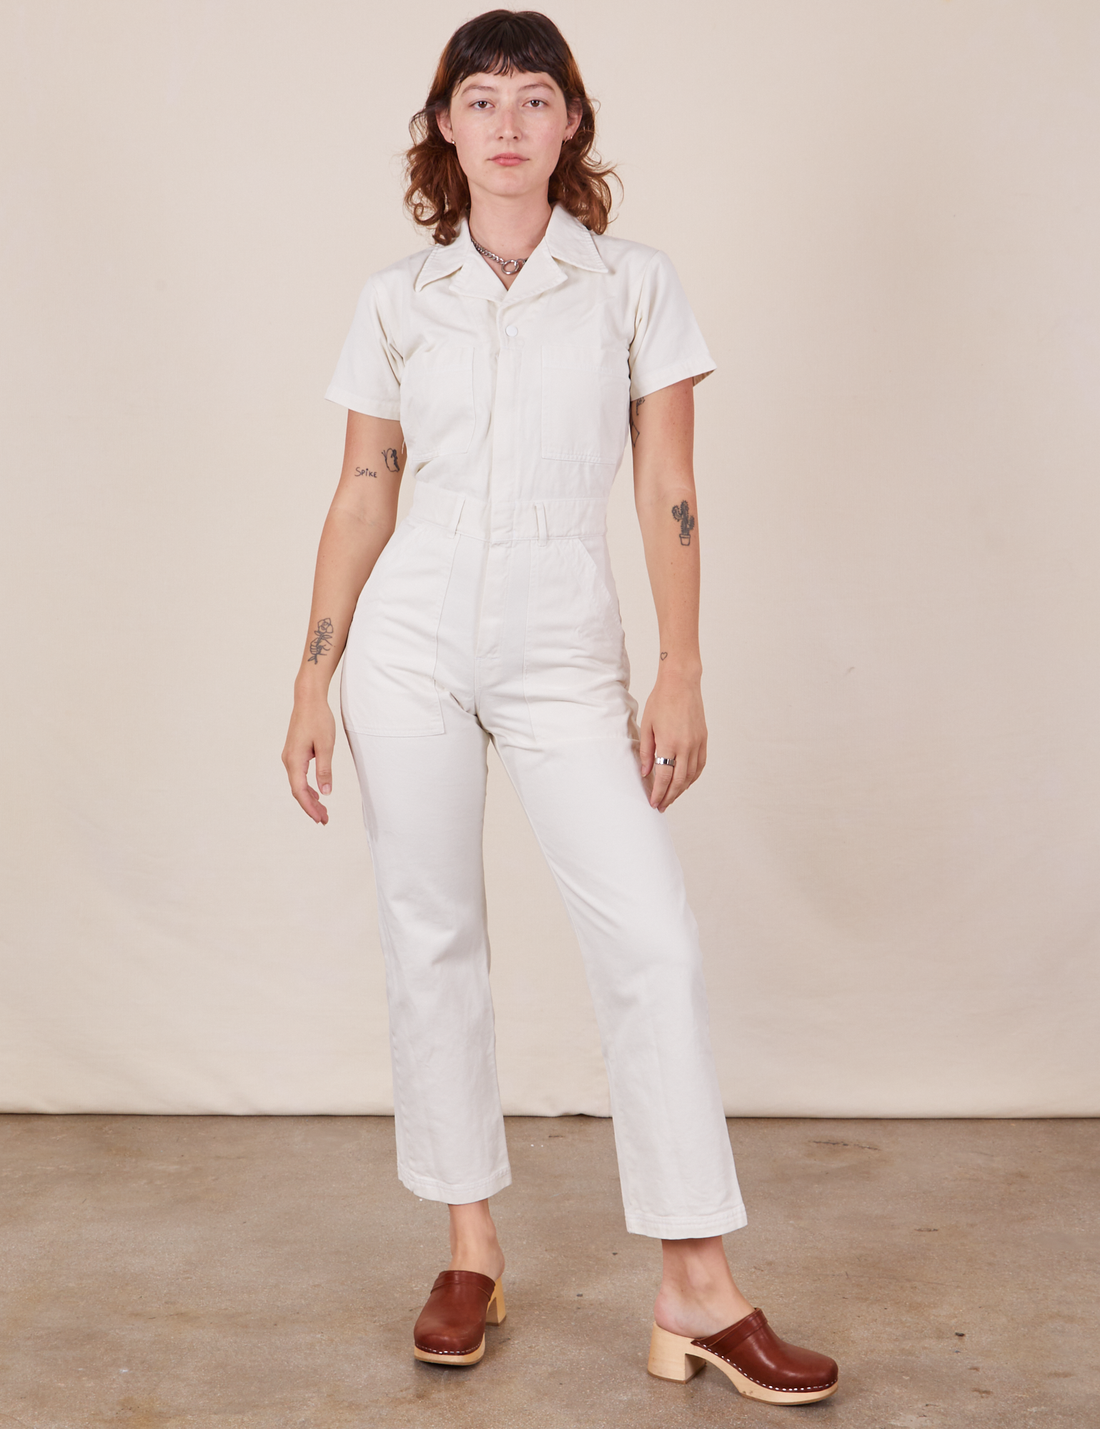 Alex is 5'8" and wearing XS Short Sleeve Jumpsuit in Vintage Tee Off-White